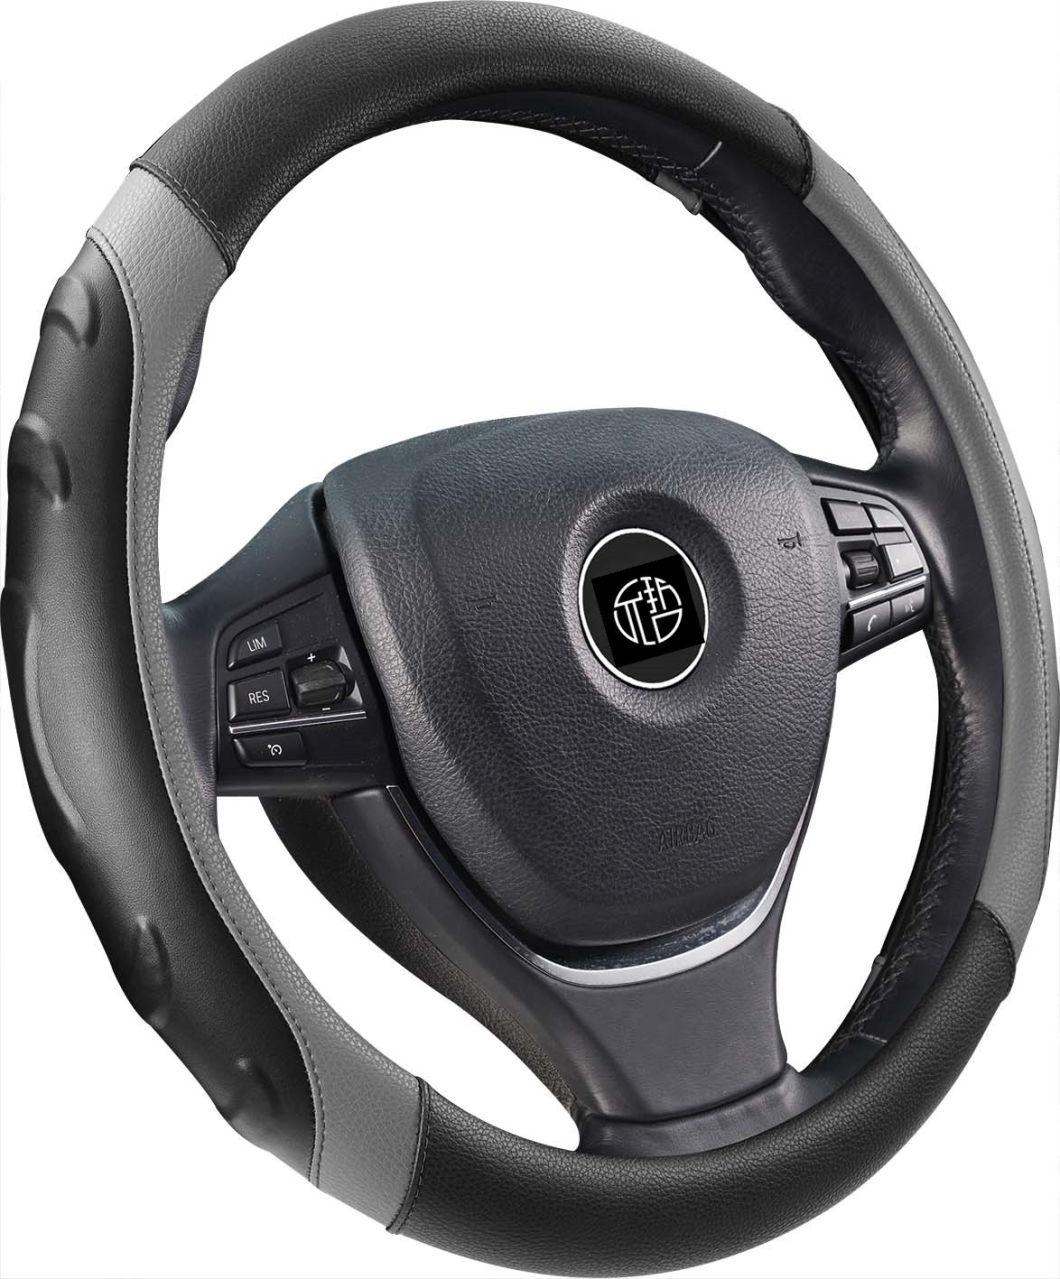 Customized Accepted Both Female&Male Steering Wheel Airbag Cover Auto Interior Accessories